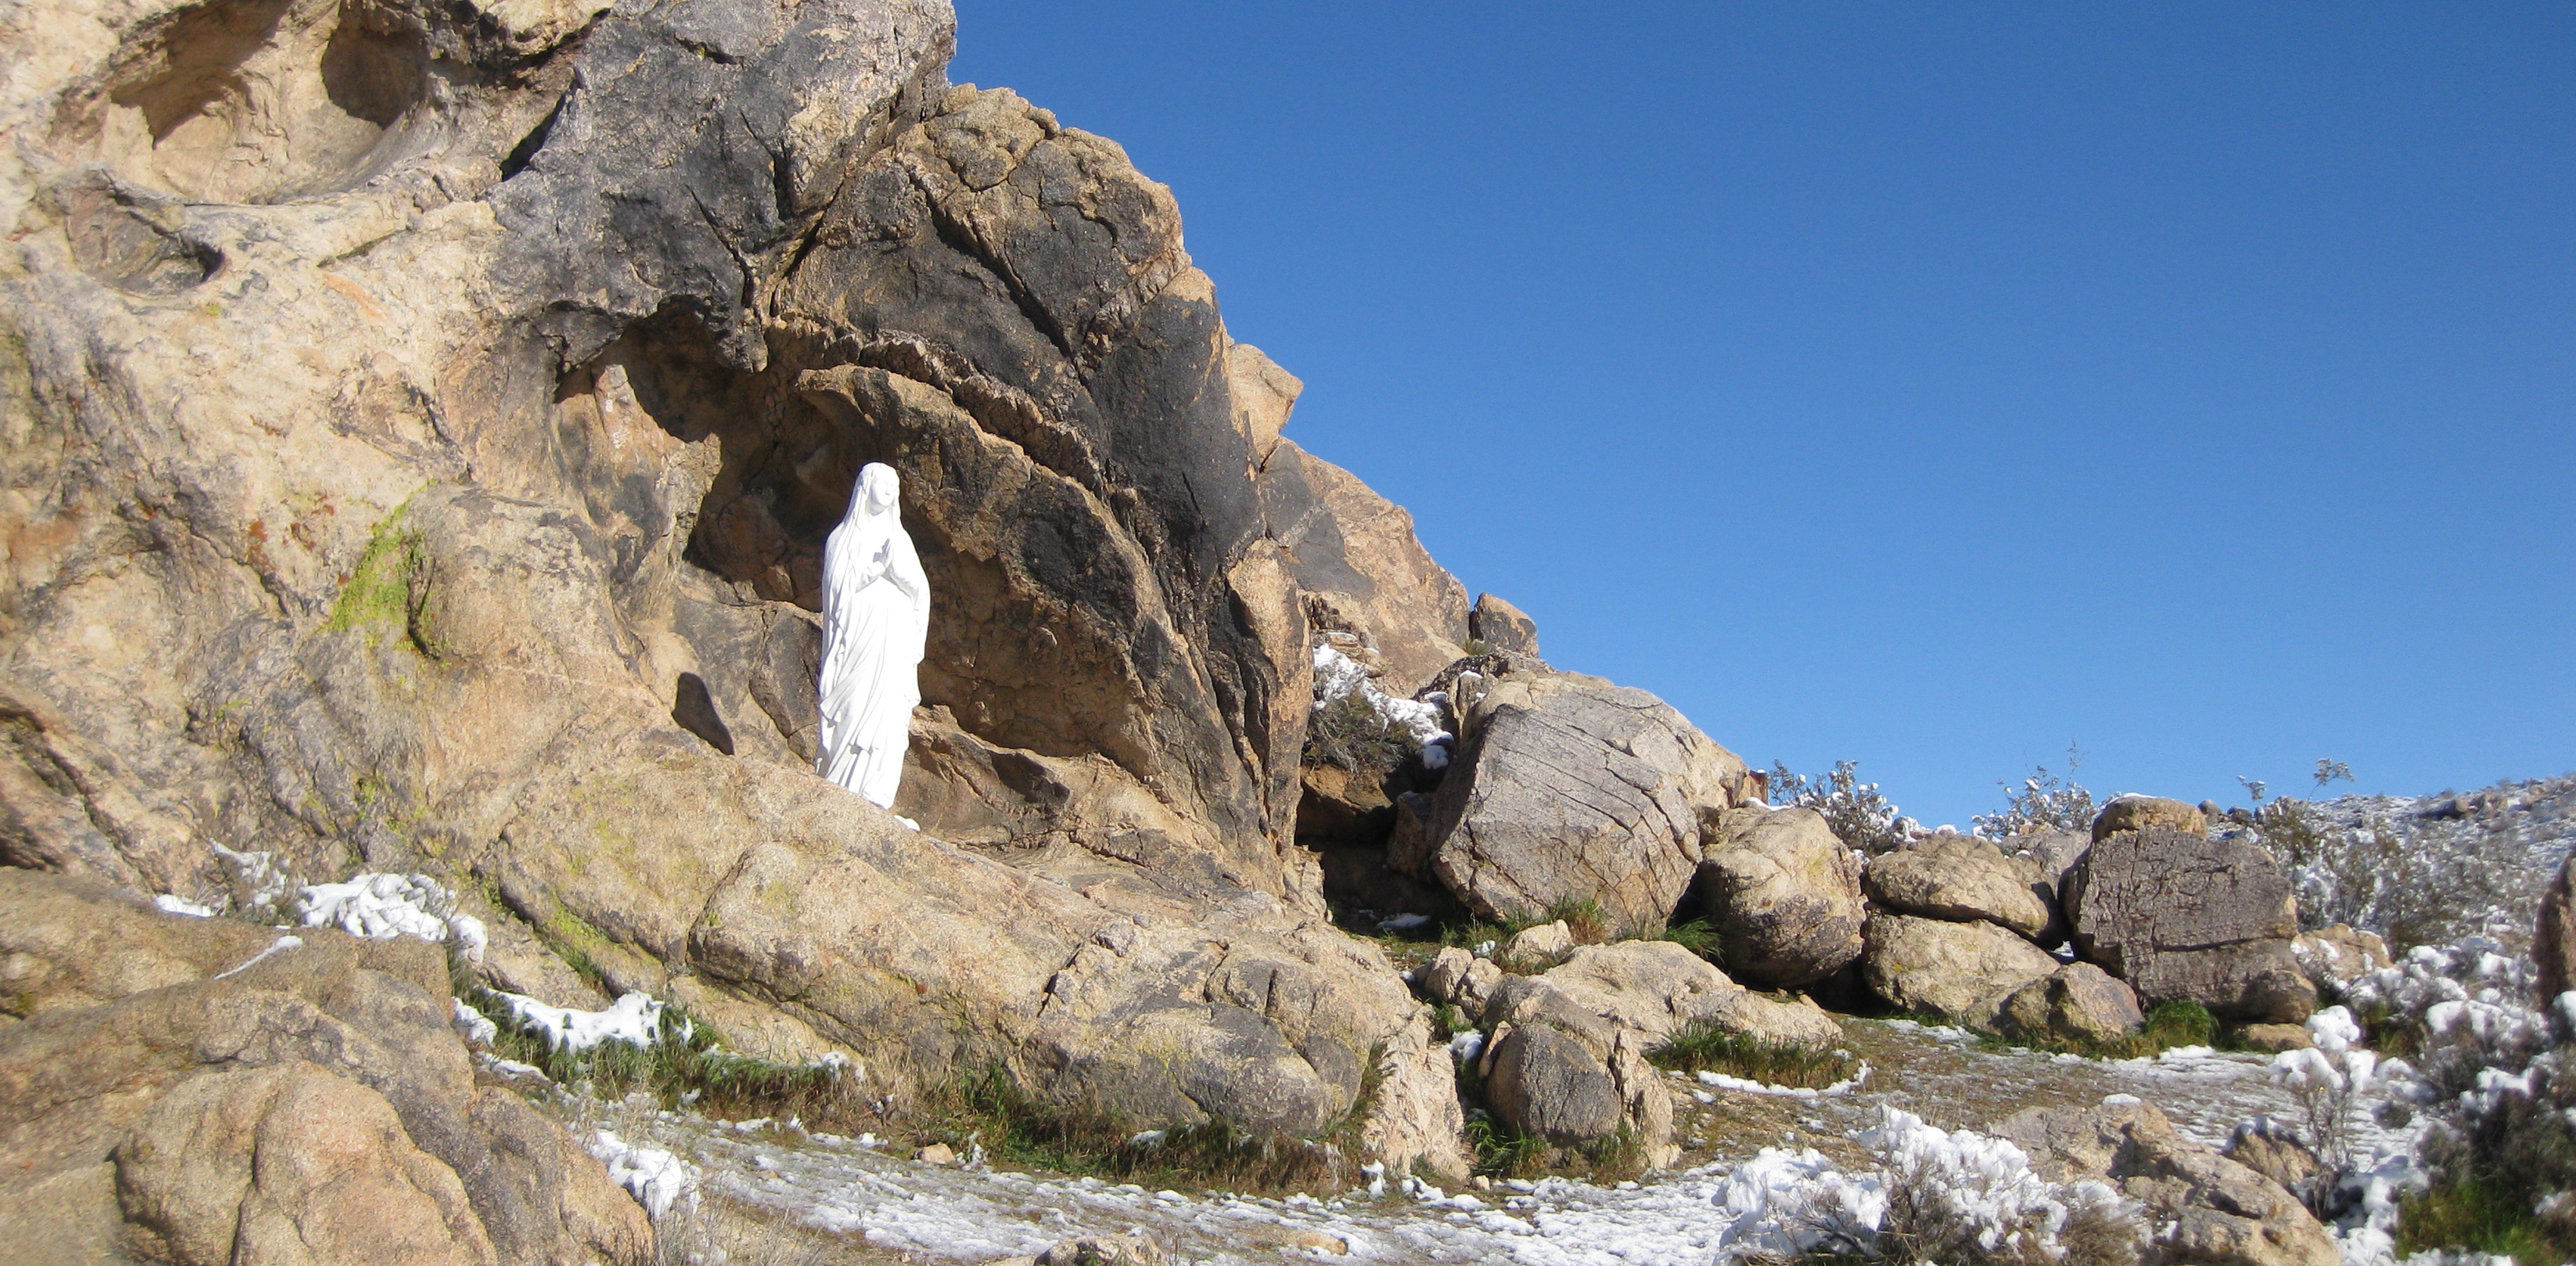 Statue of Mary in rock formation above flowing stream